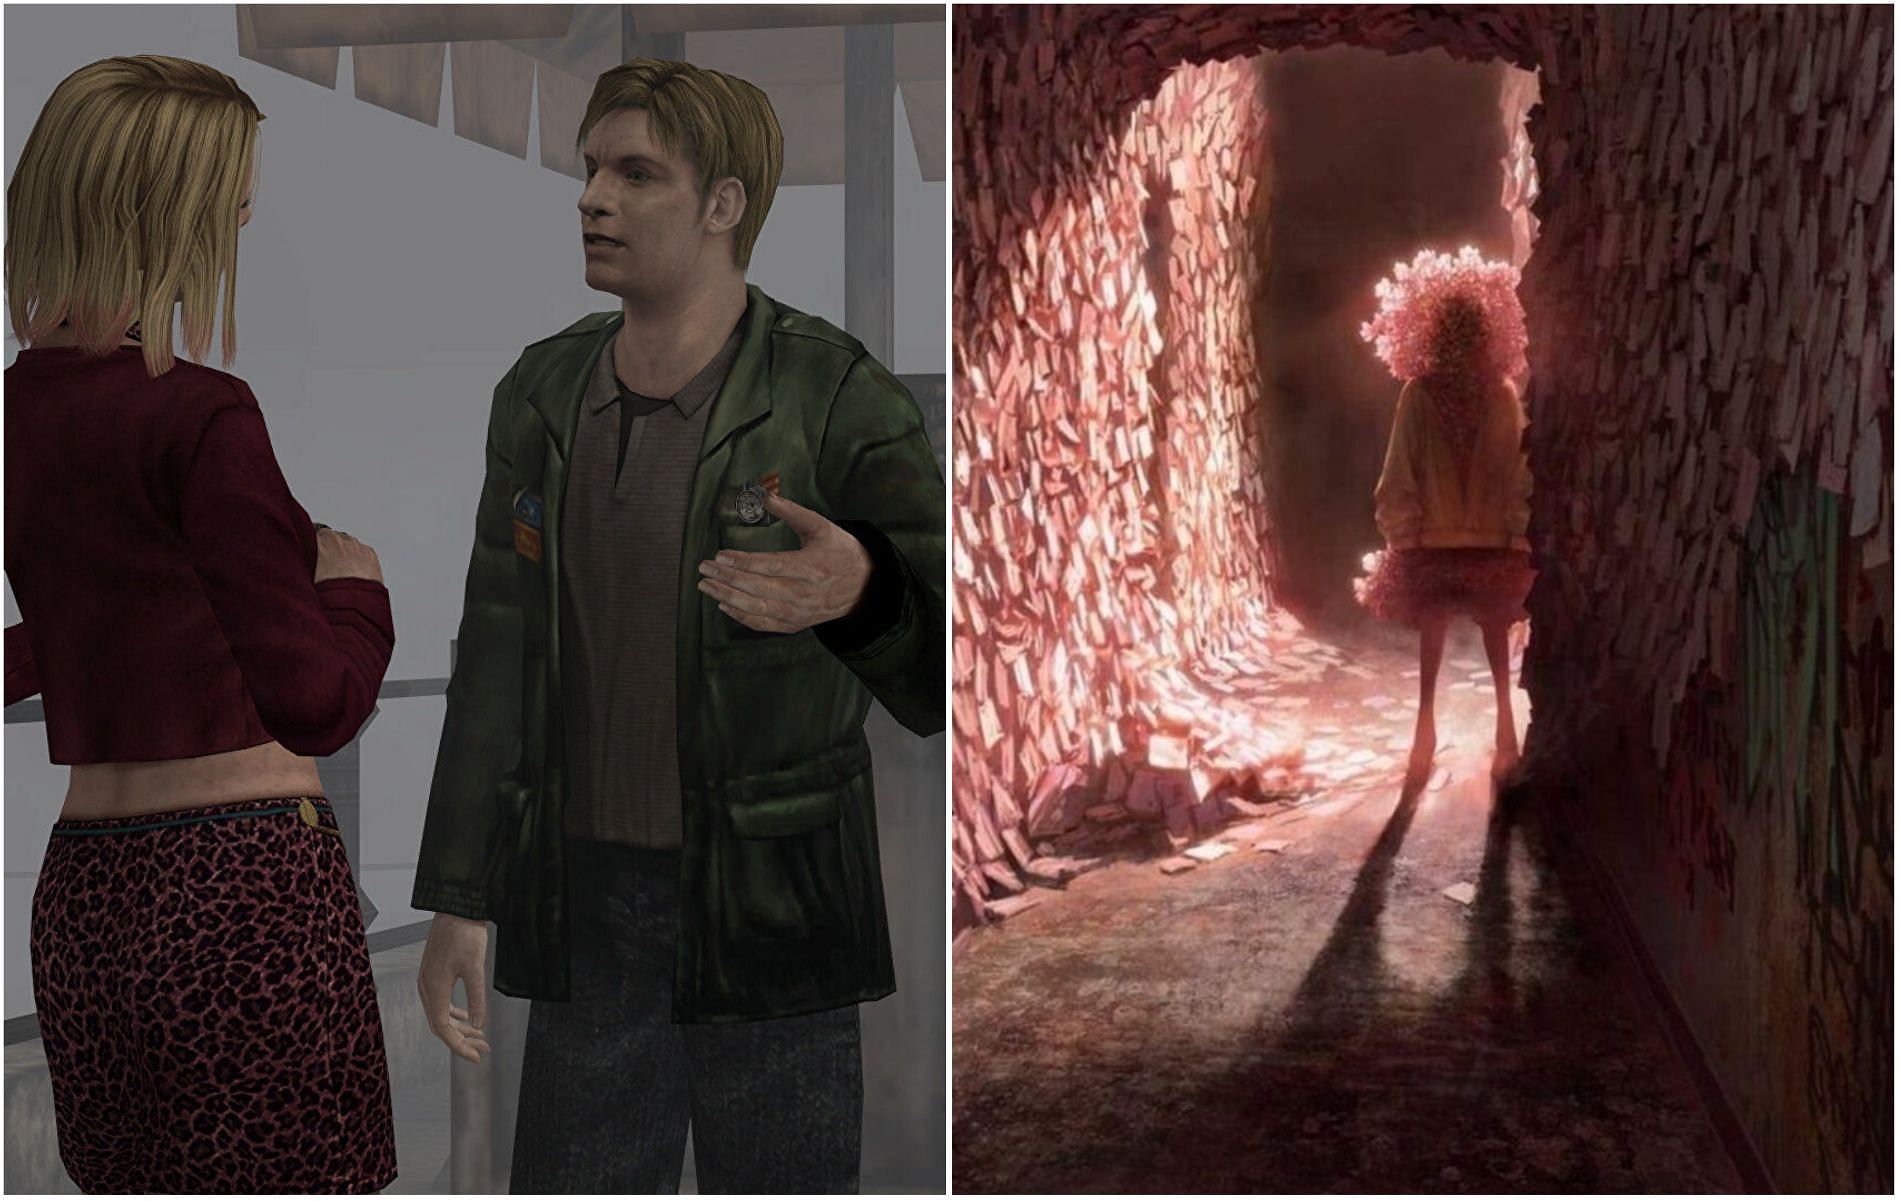 Images claiming to show Konami's Silent Hill 2 remake have